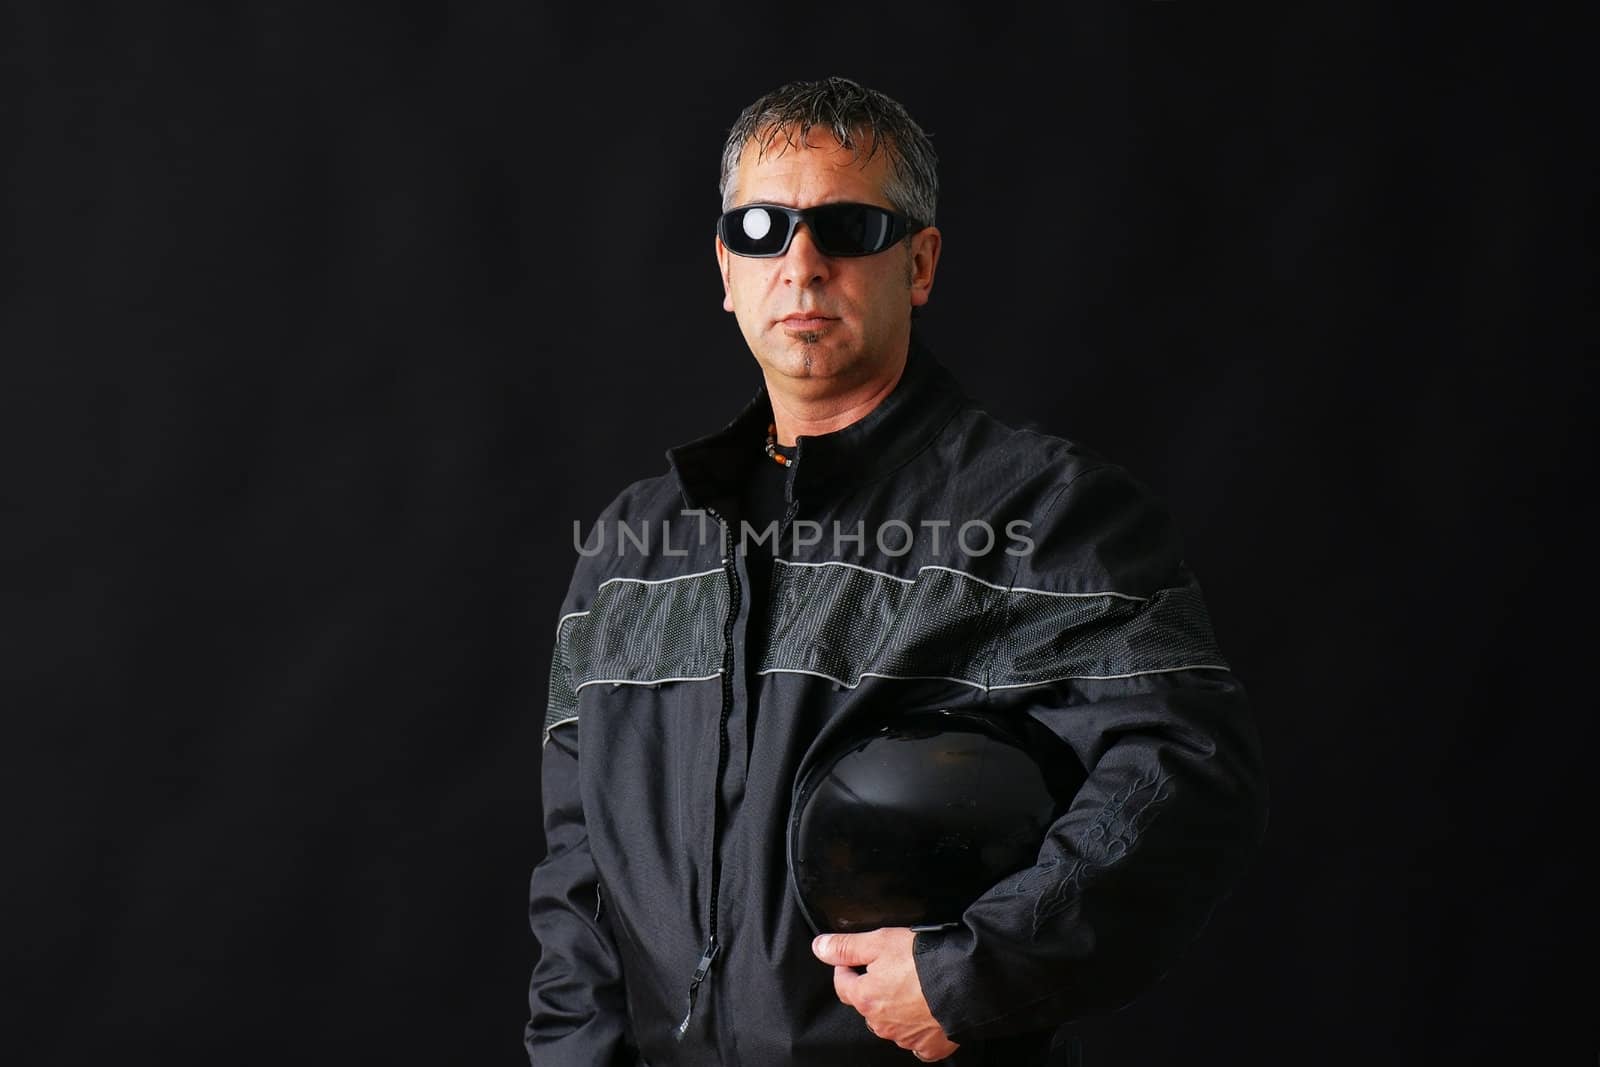 Tough looking guy with biker jacket and helmet, could be criminal, middle aged, studio shot over black.